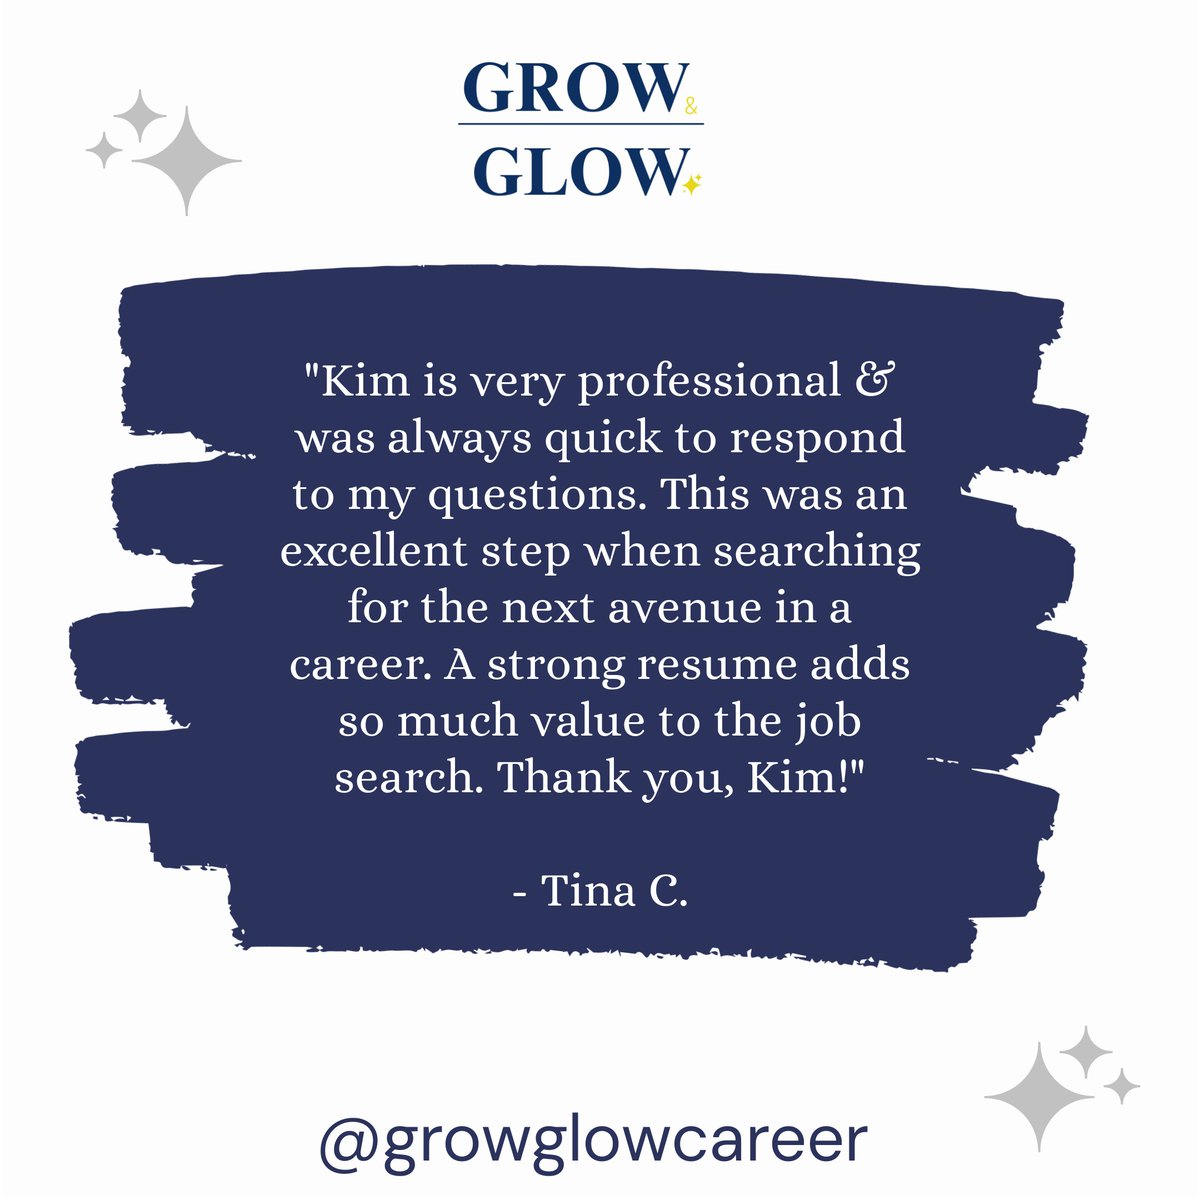 Thank you for your review, Tina!! #GrowGlow #GG #Resumewriting #resumes #jobsearchhelp #Careercoach #careerchange #resumereview #LoveOurCustomers #ReviewOfTheWeek